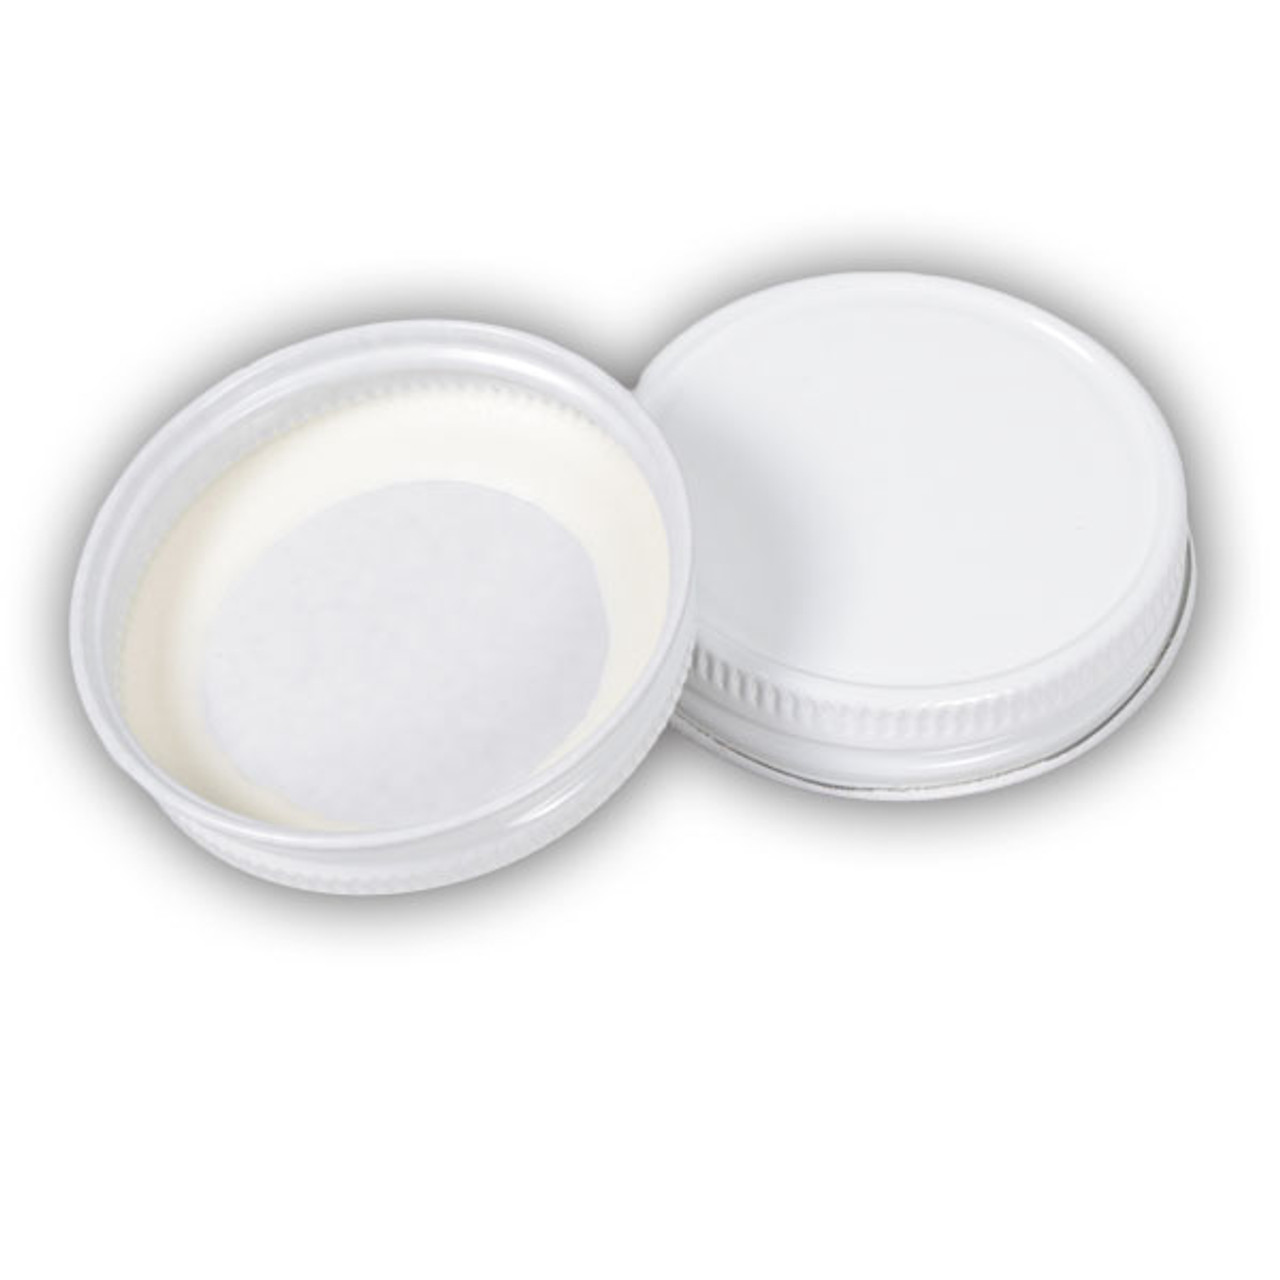 https://cdn11.bigcommerce.com/s-fx4fw18j2i/images/stencil/1280x1280/products/125/385/48MM_WHITE_Metal_Lids_for_8_oz._and_1_lb._Glass_Classic__02701__35555.1629355754.jpg?c=1?imbypass=on